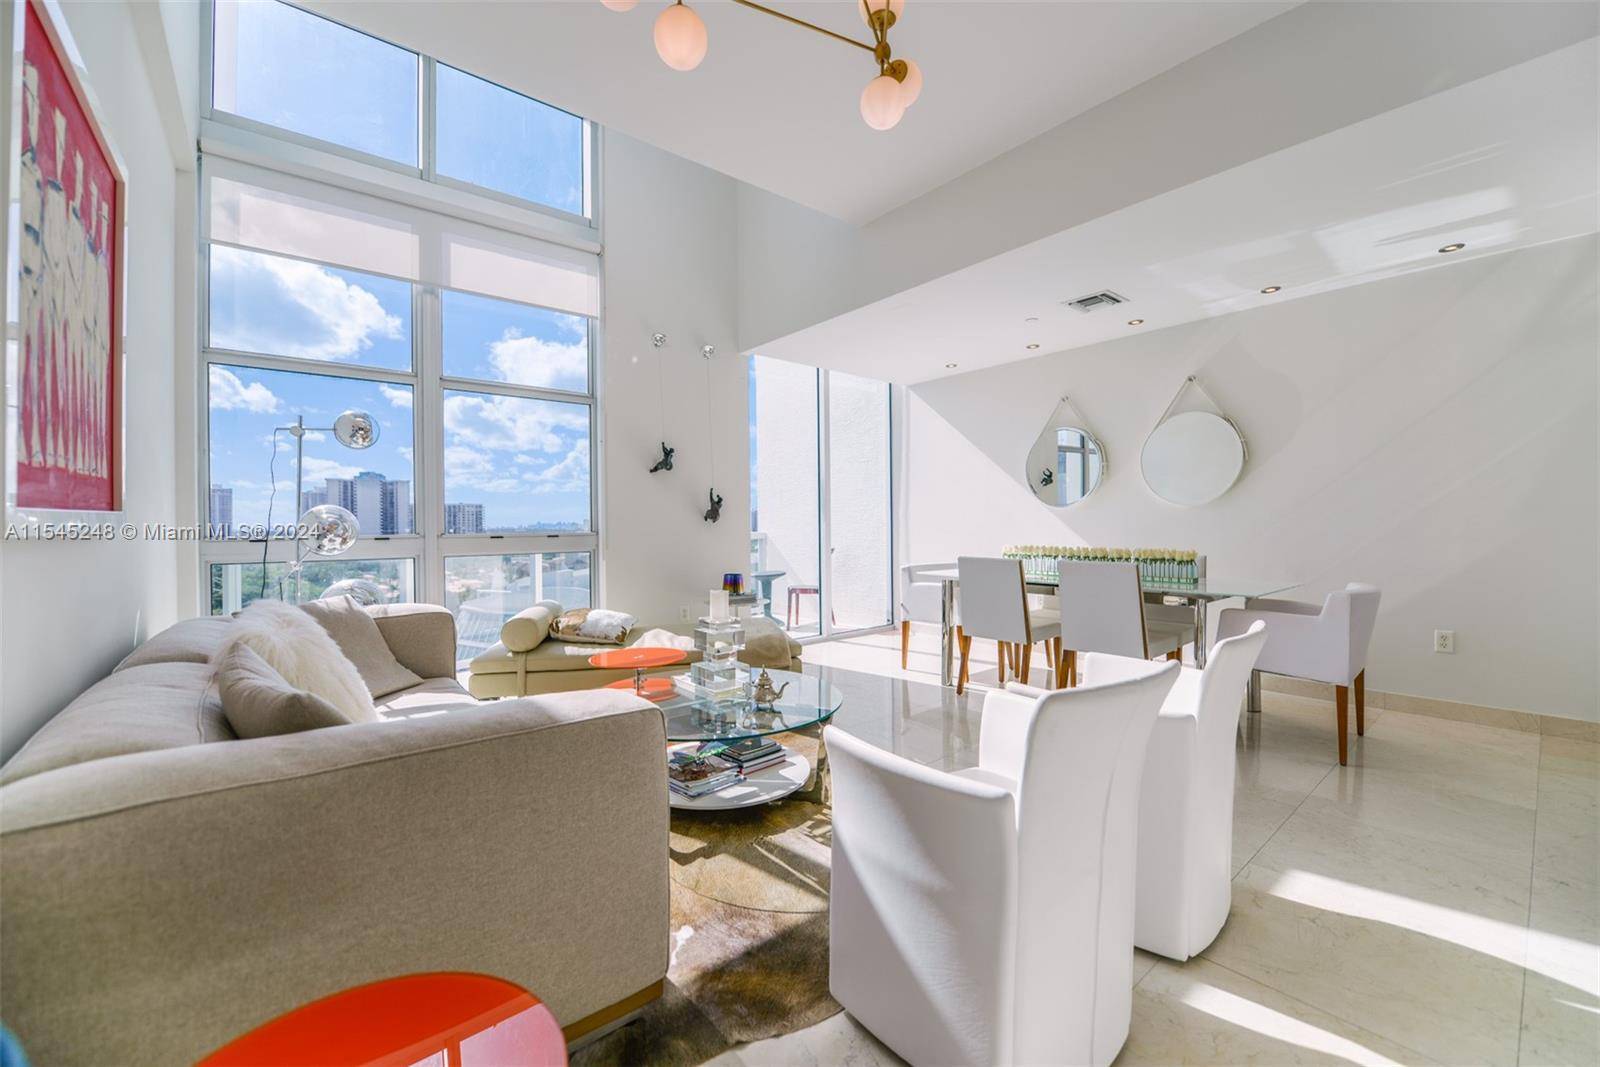 Experience luxury living in this unique two story, 2 bedroom, 2 bathroom penthouse condo boasting city and intracoastal views in Aventura, FL.